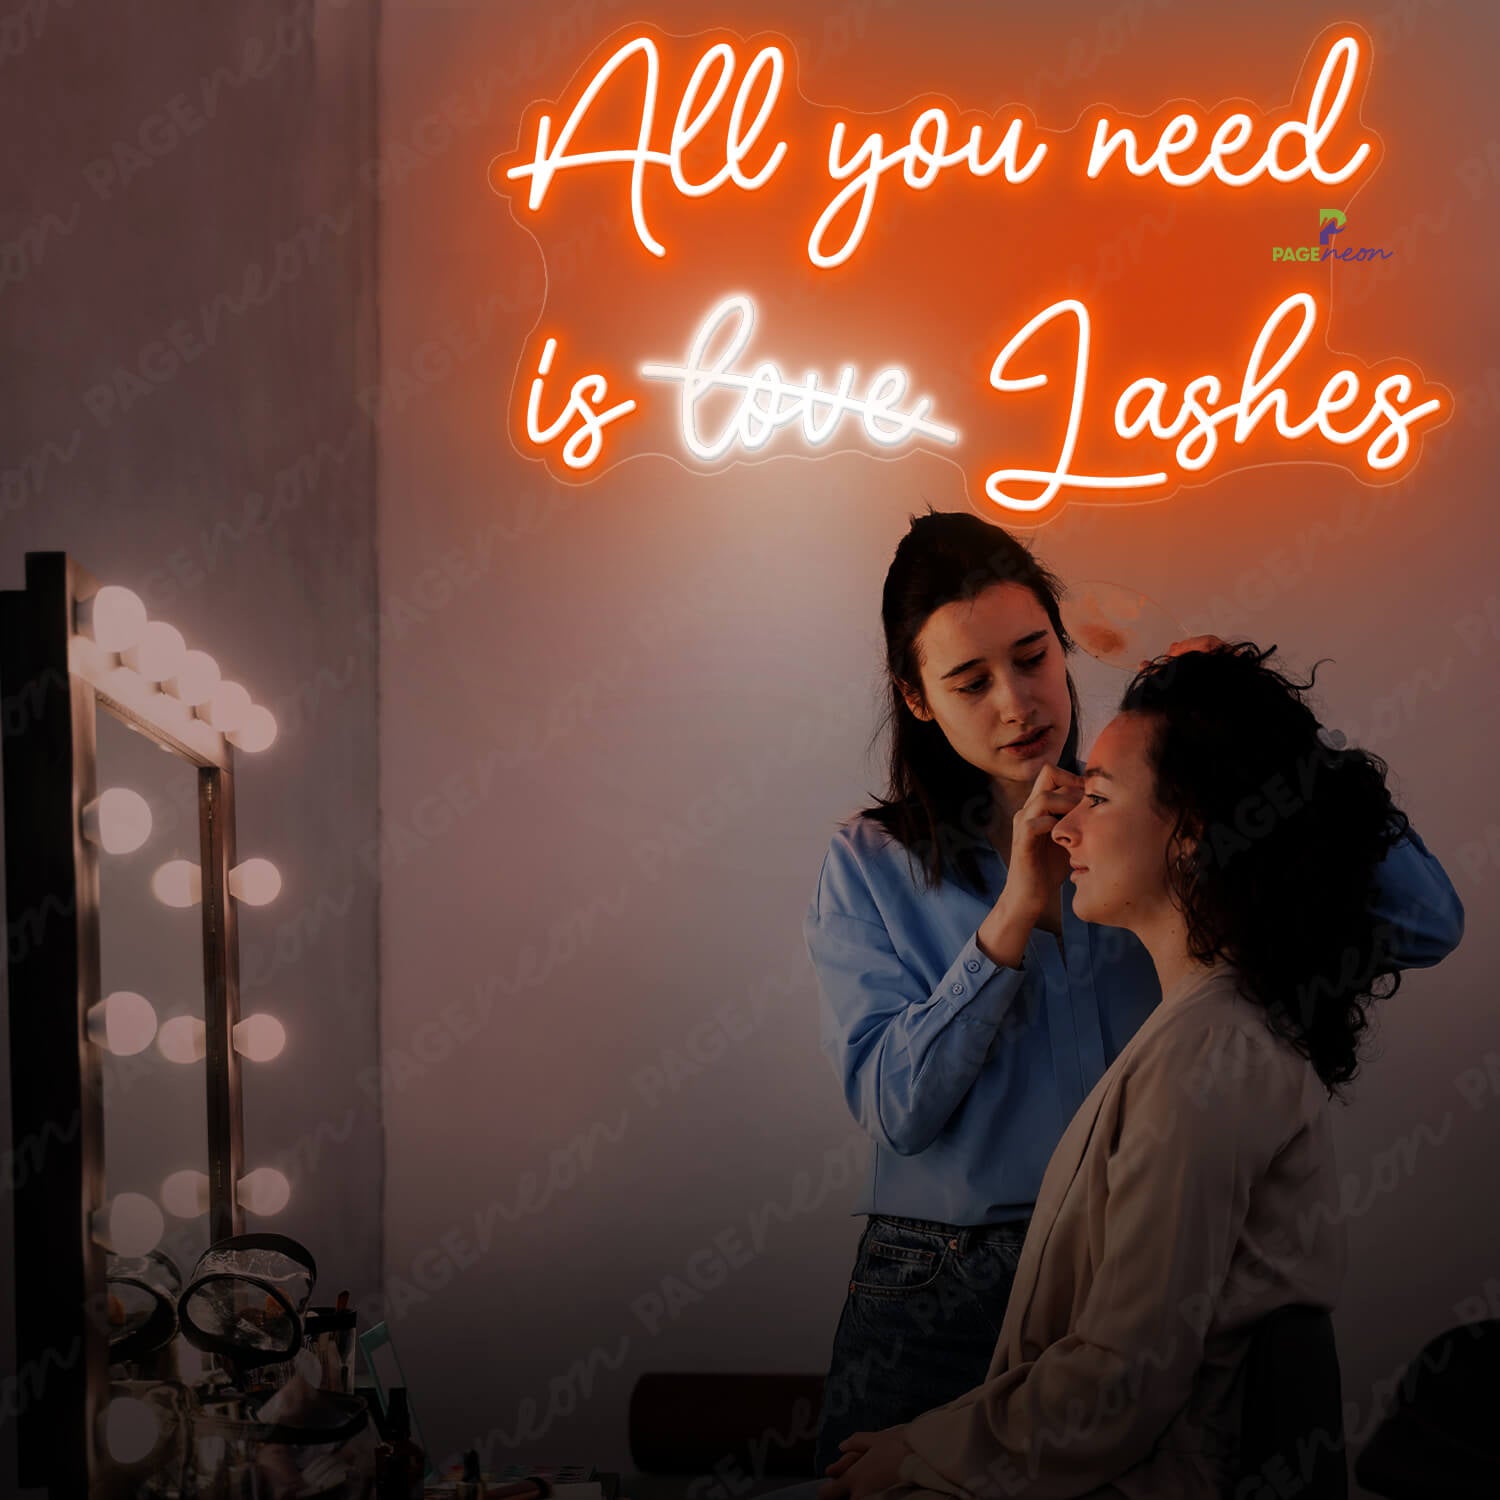 All You Need Is Love Lashes Neon Sign Beauty Led Light Orange